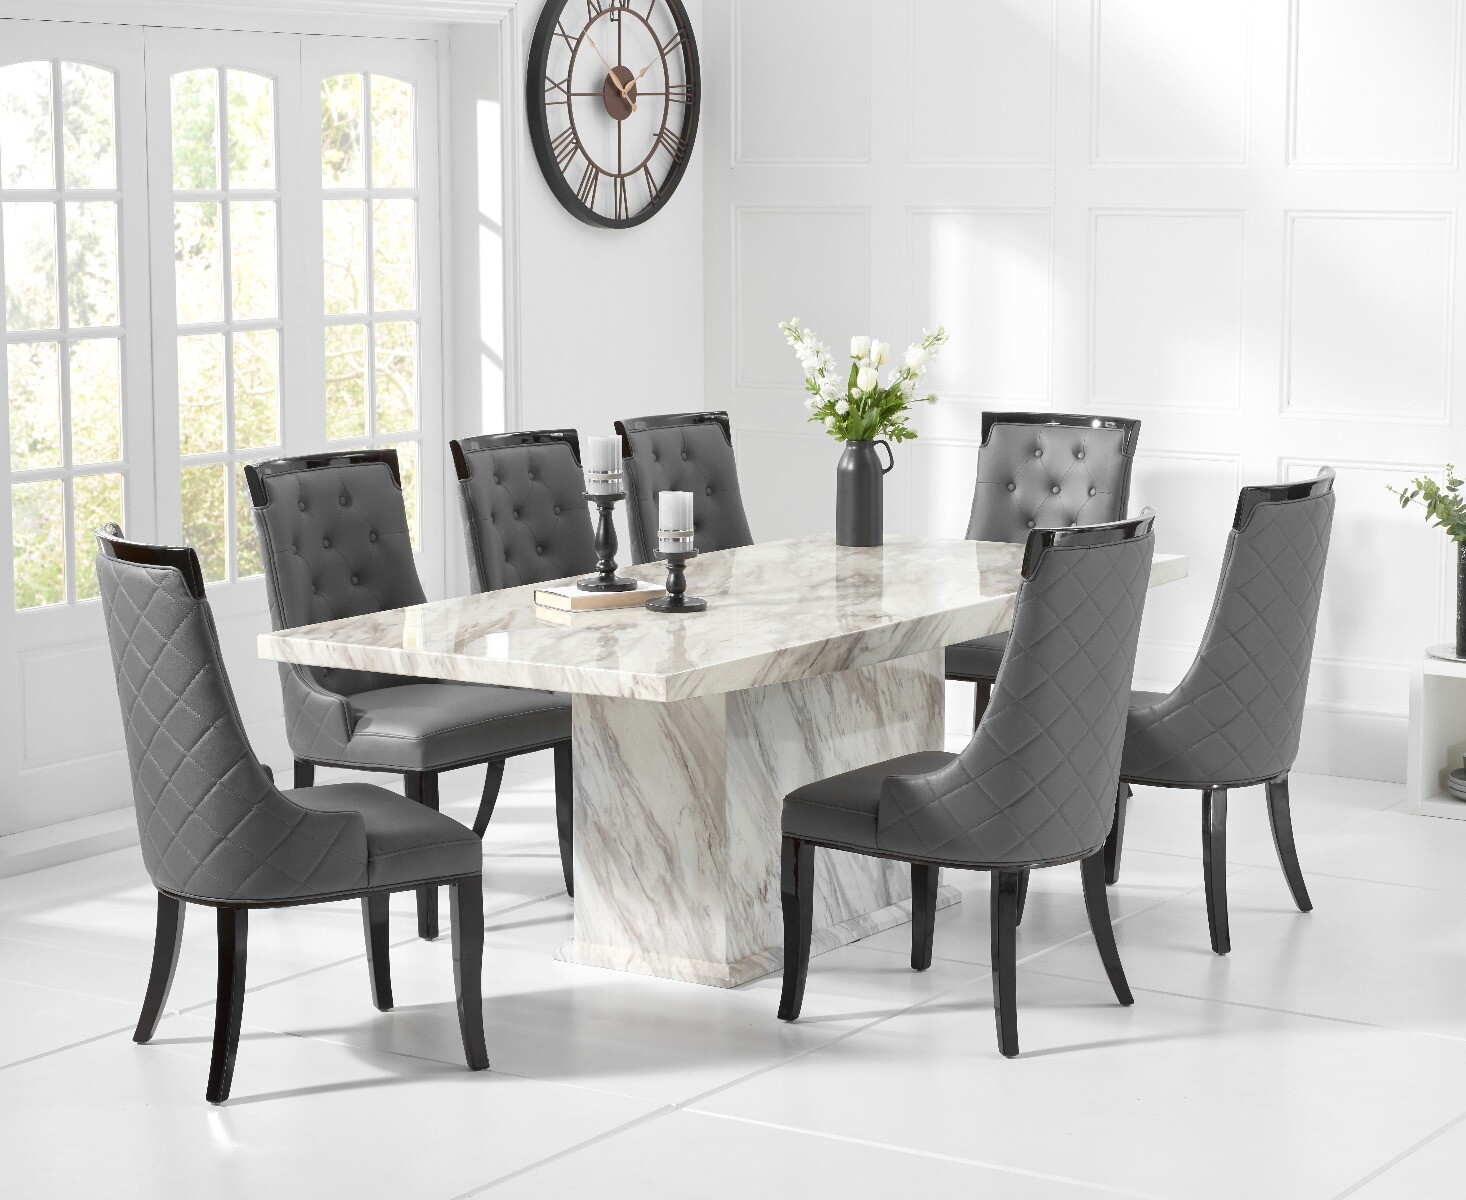 Calacatta 220cm Marbleeffect Dining Table With 8 Cream Francesca Chairs